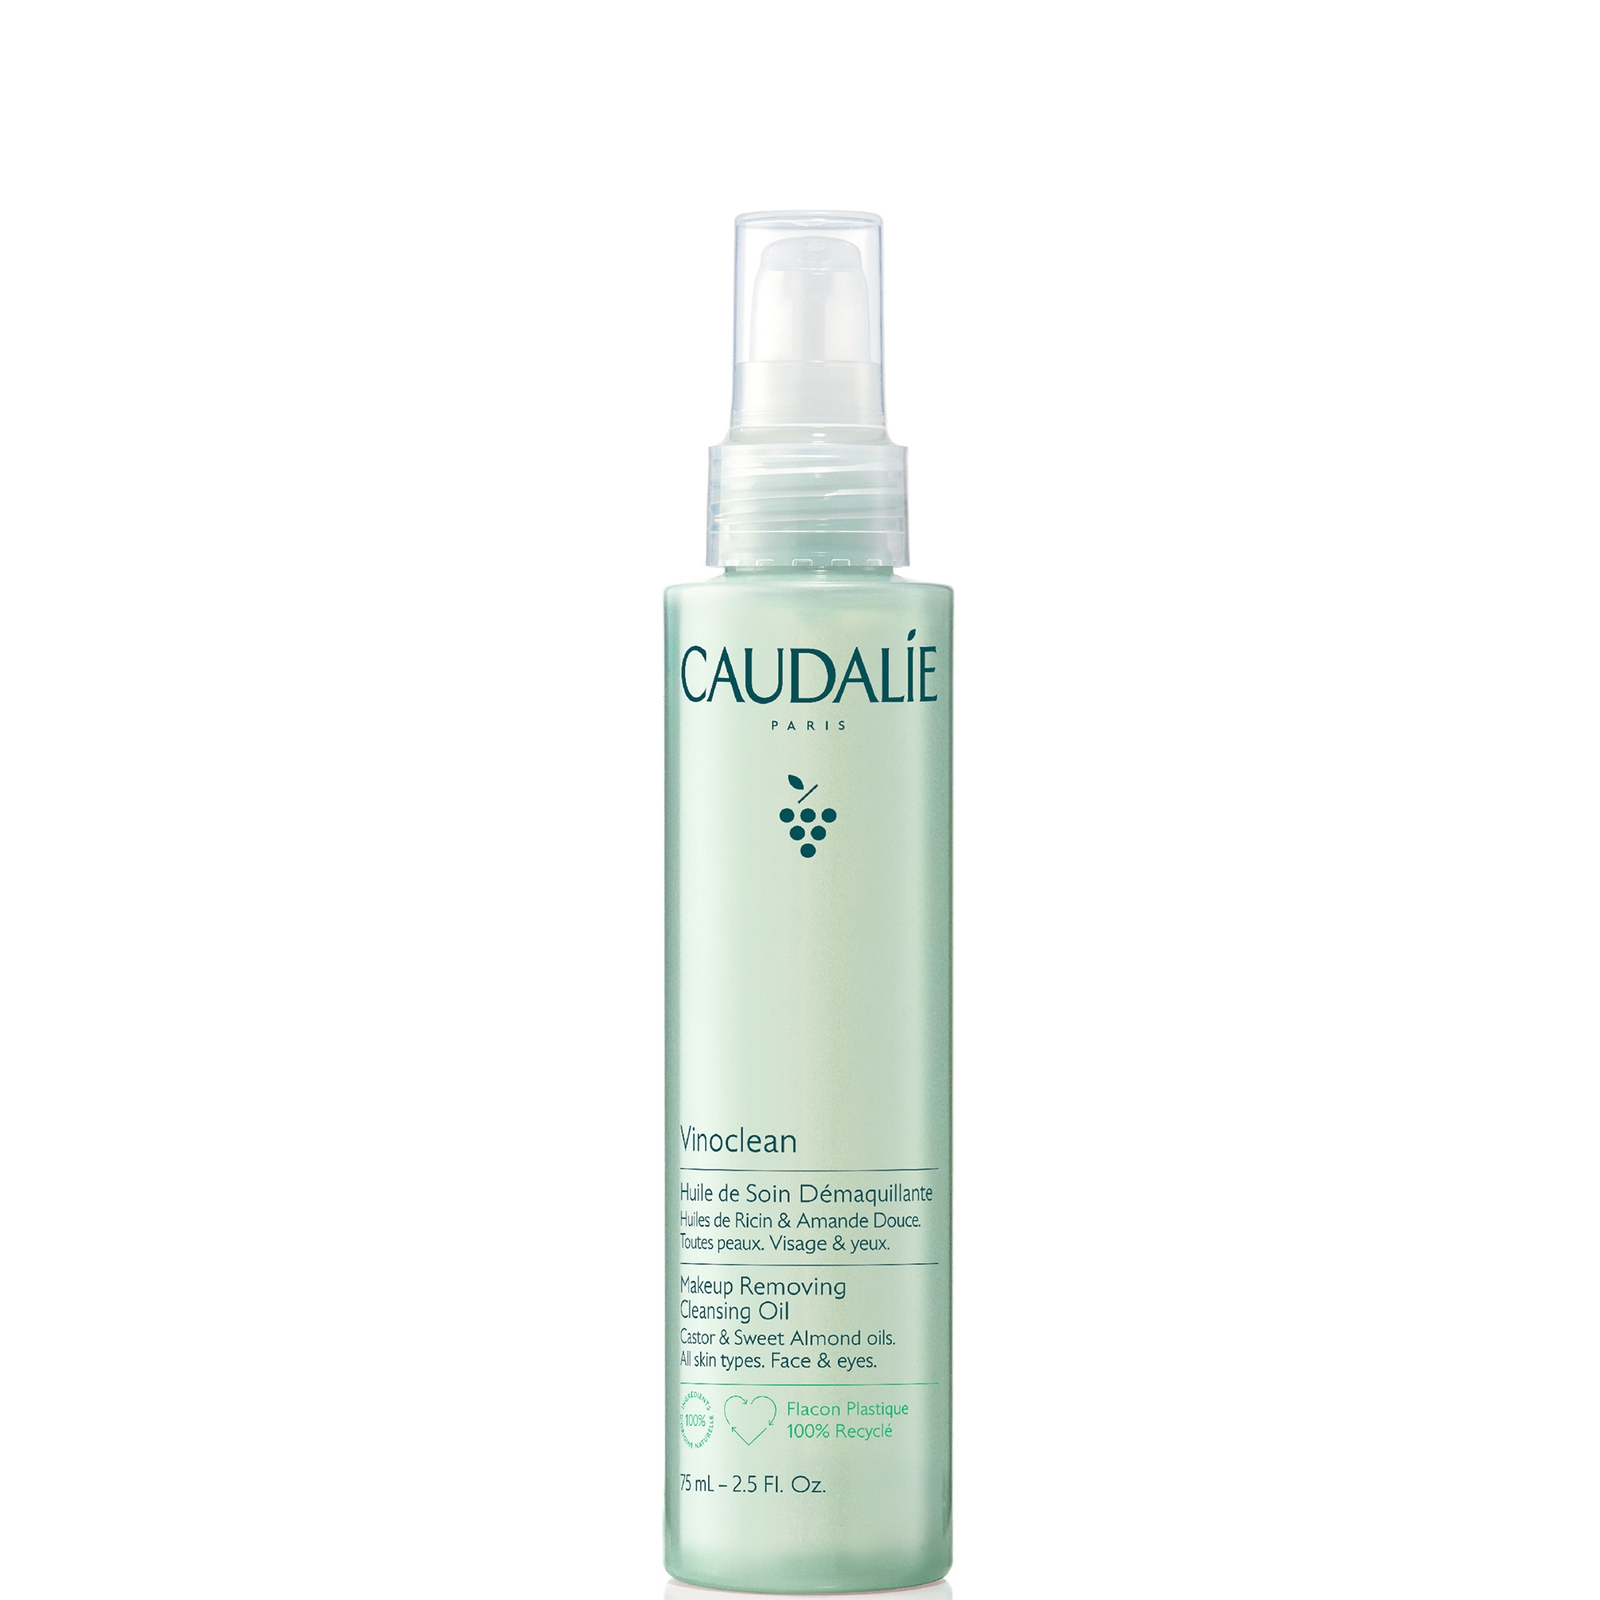 Photos - Facial / Body Cleansing Product Caudalie Vinoclean Makeup Removing Cleansing Oil 75ml 